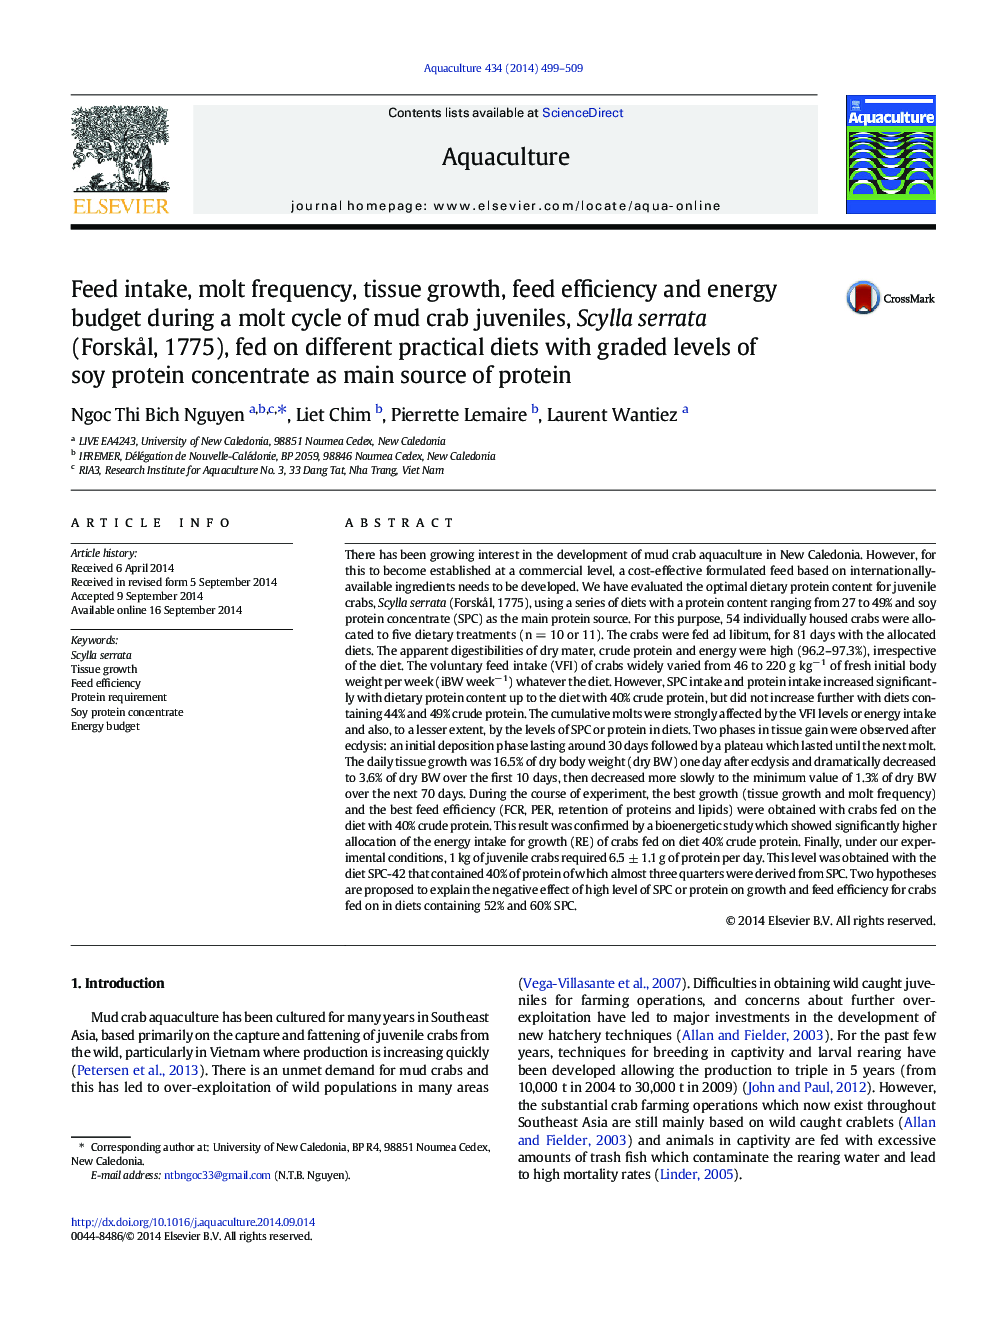 Feed intake, molt frequency, tissue growth, feed efficiency and energy budget during a molt cycle of mud crab juveniles, Scylla serrata (Forskål, 1775), fed on different practical diets with graded levels of soy protein concentrate as main source of prote